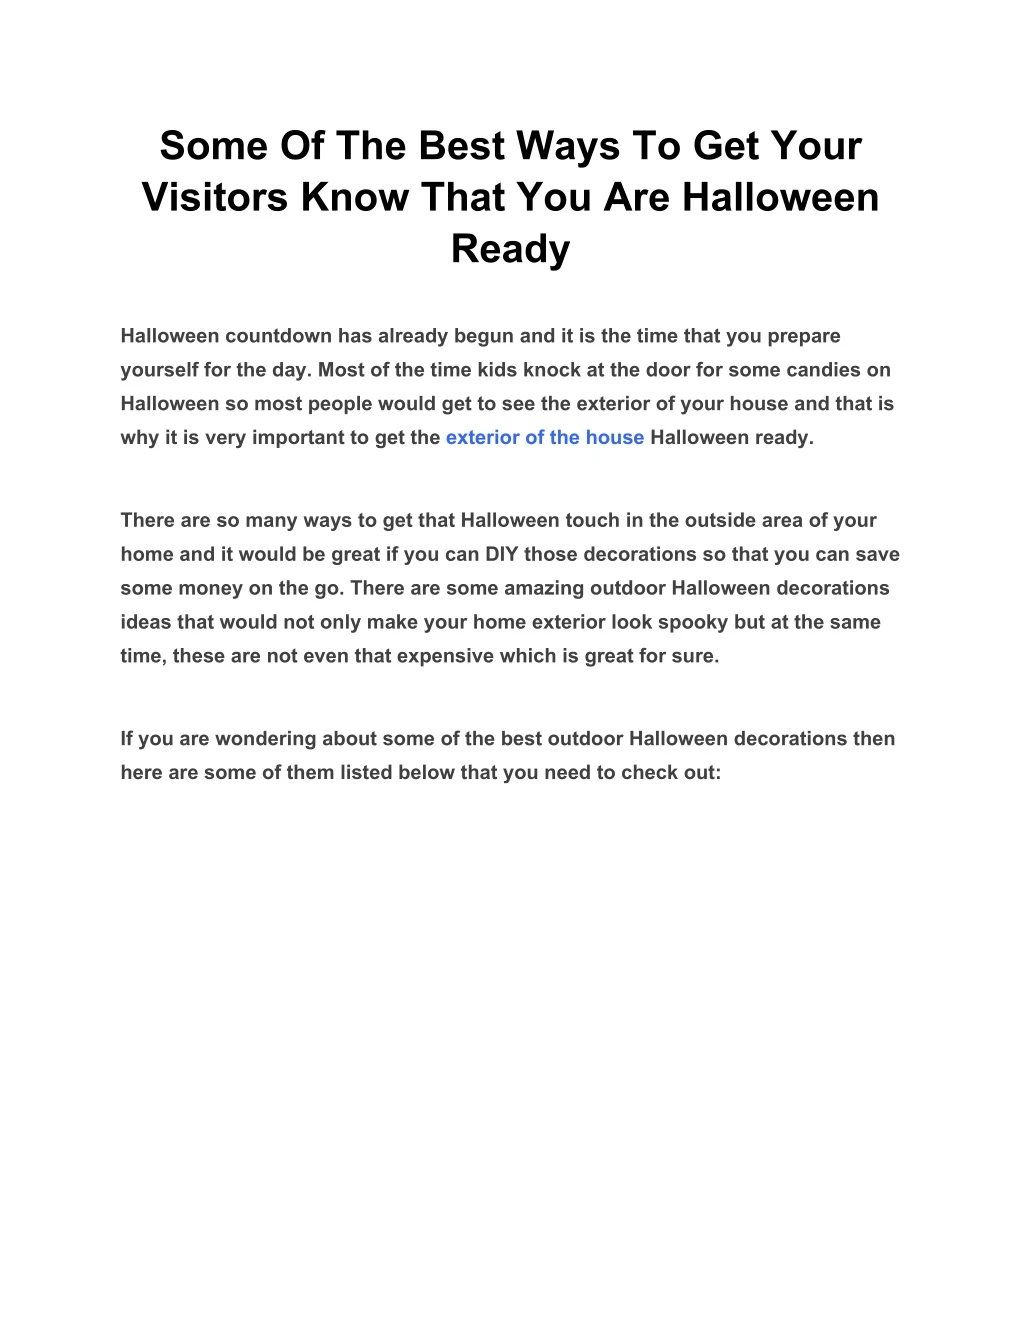 some of the best ways to get your visitors know